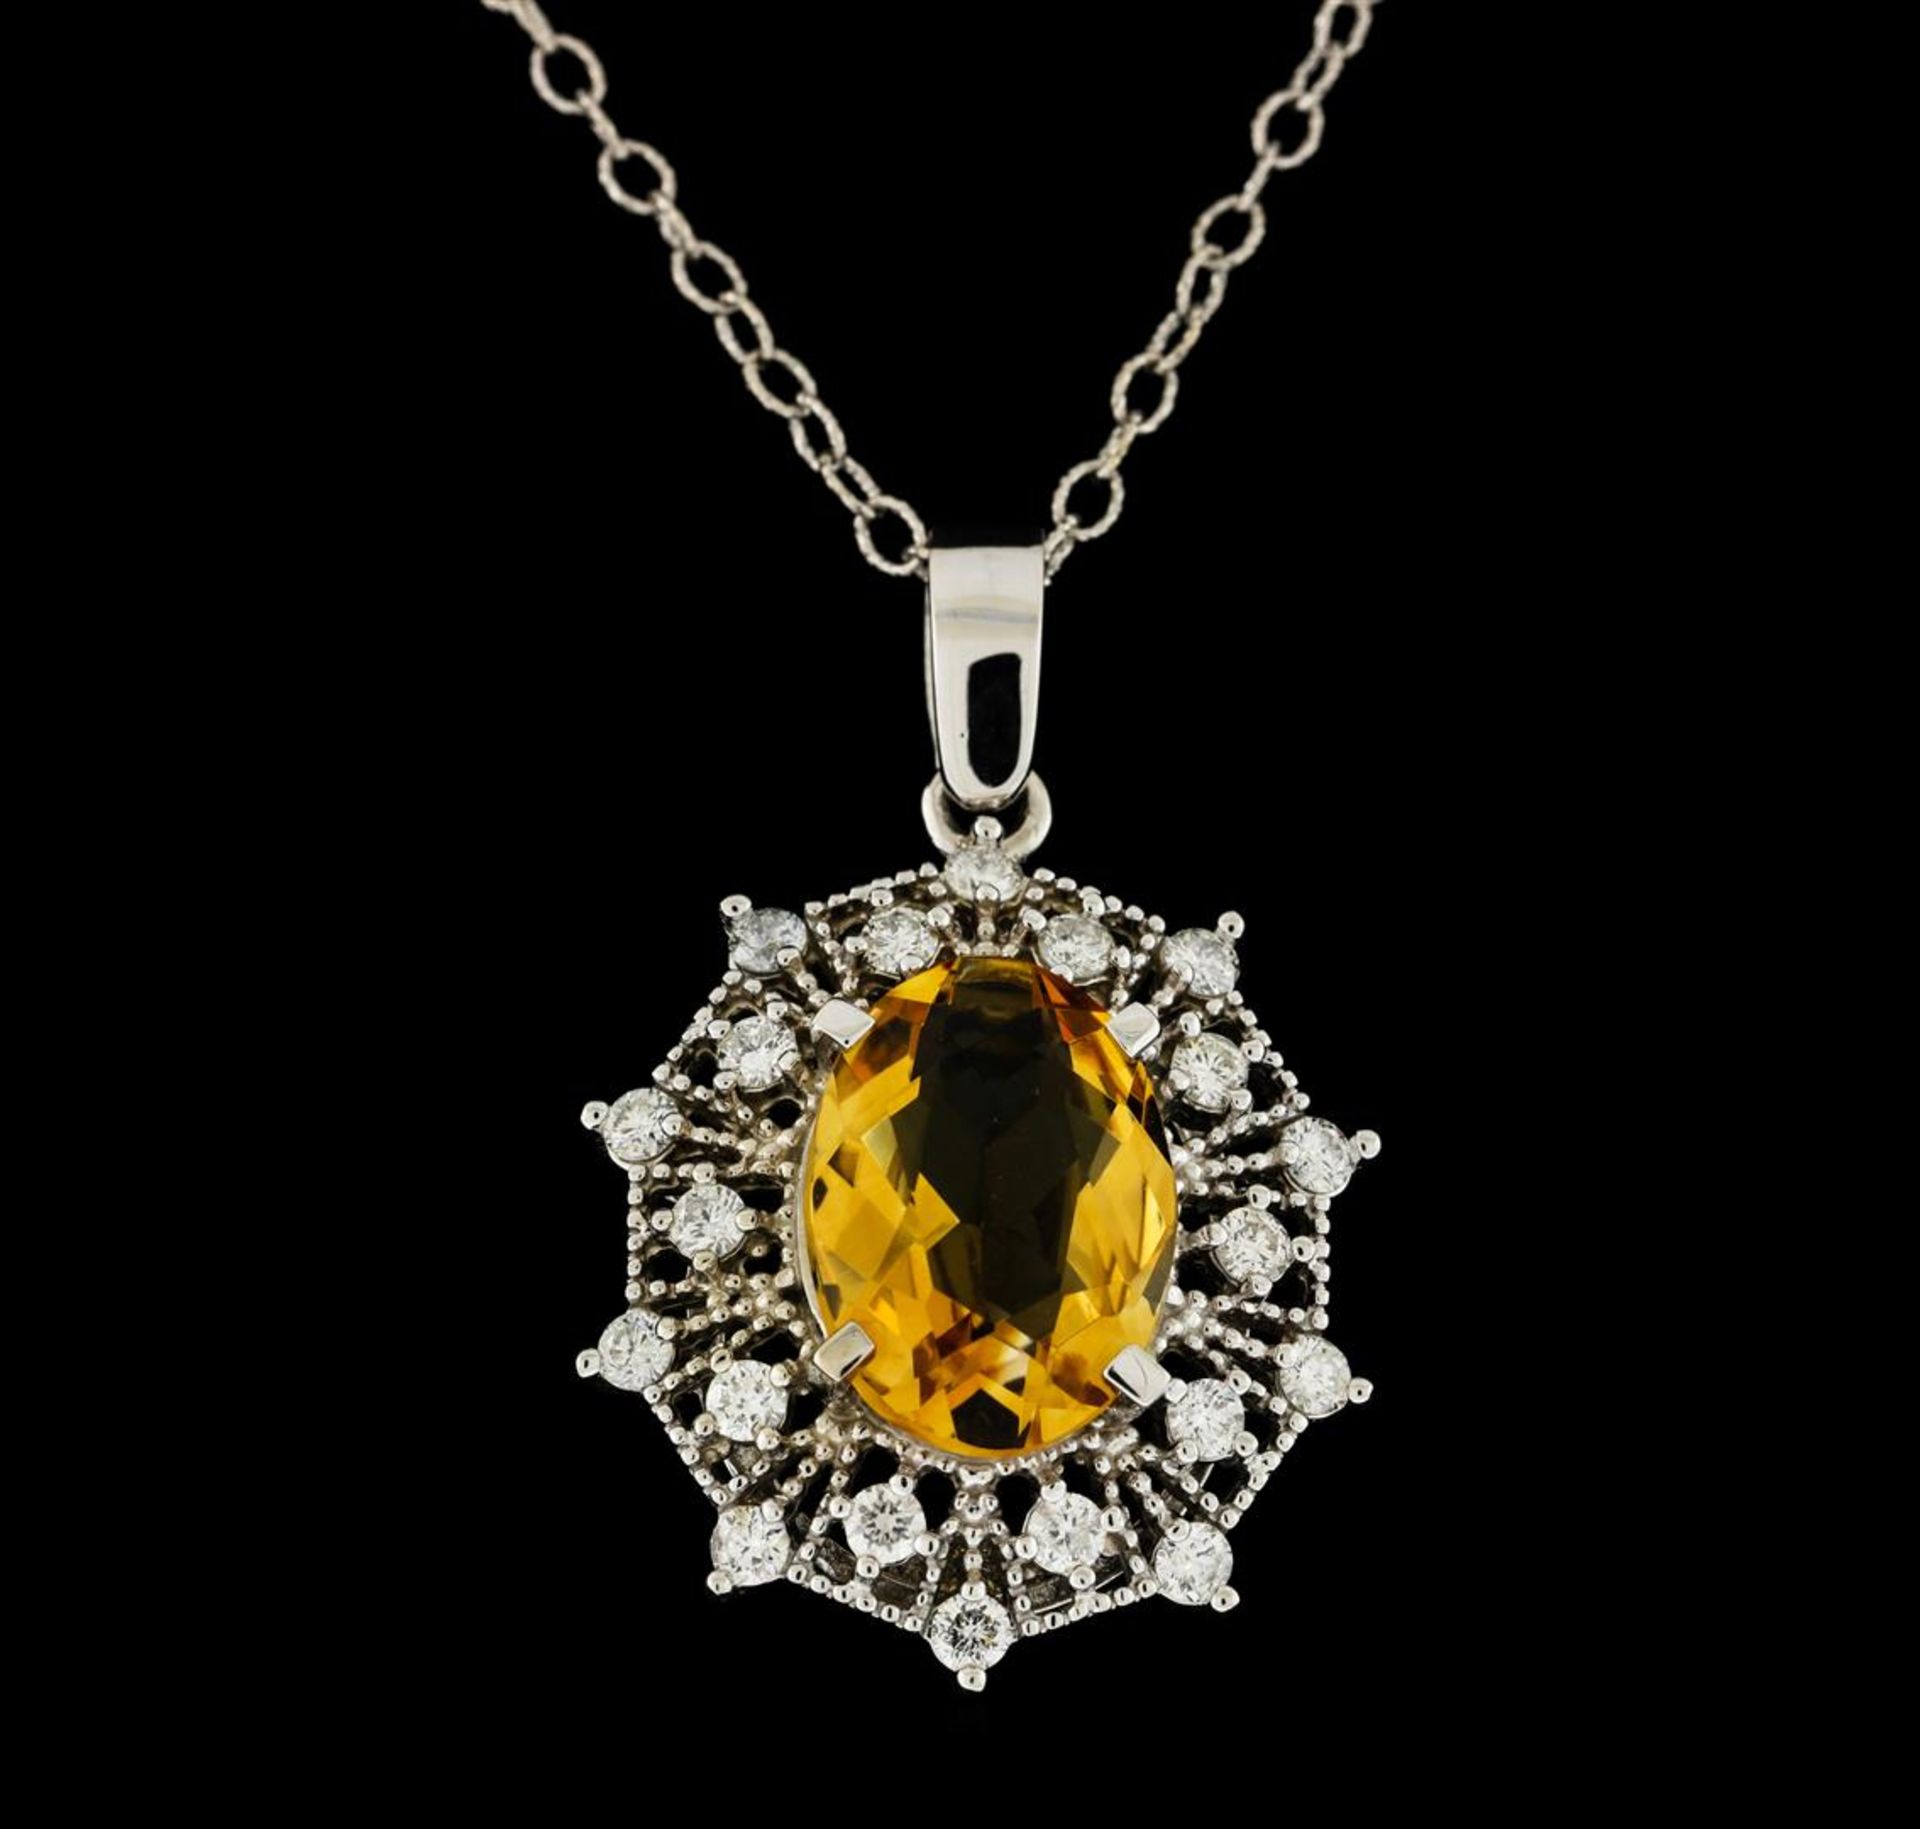 4.30 ctw Citrine and Diamond Pendant With Chain - 14KT White Gold - Image 2 of 2